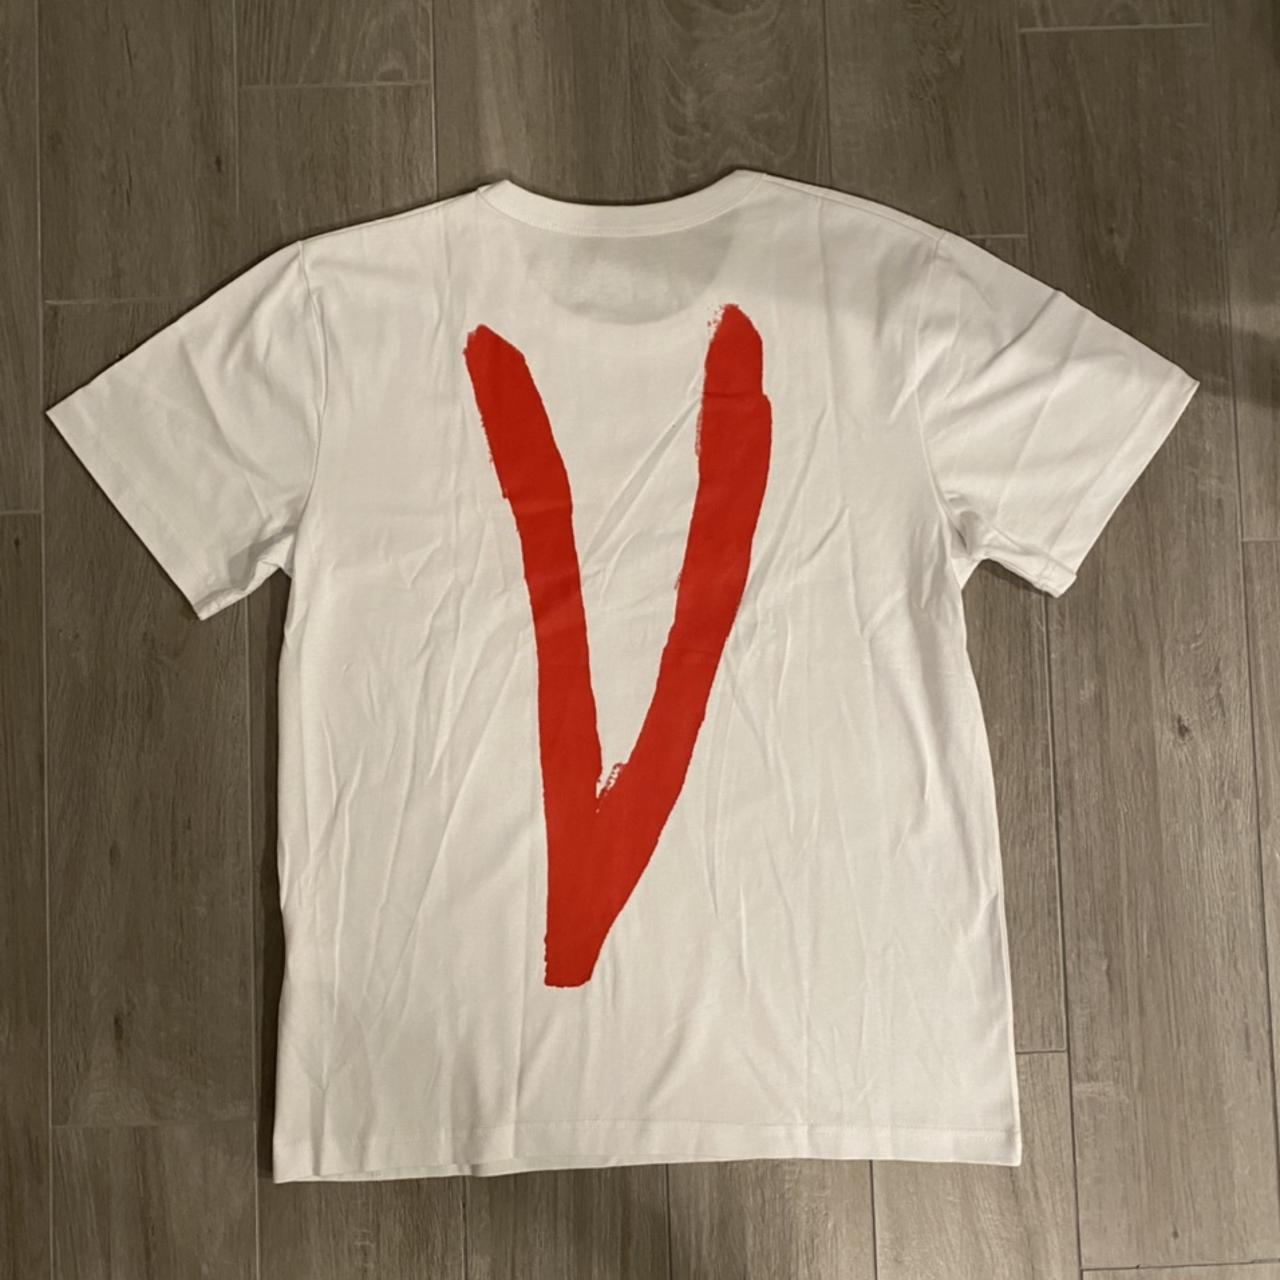 Vlone love size medium with large red v and text... - Depop